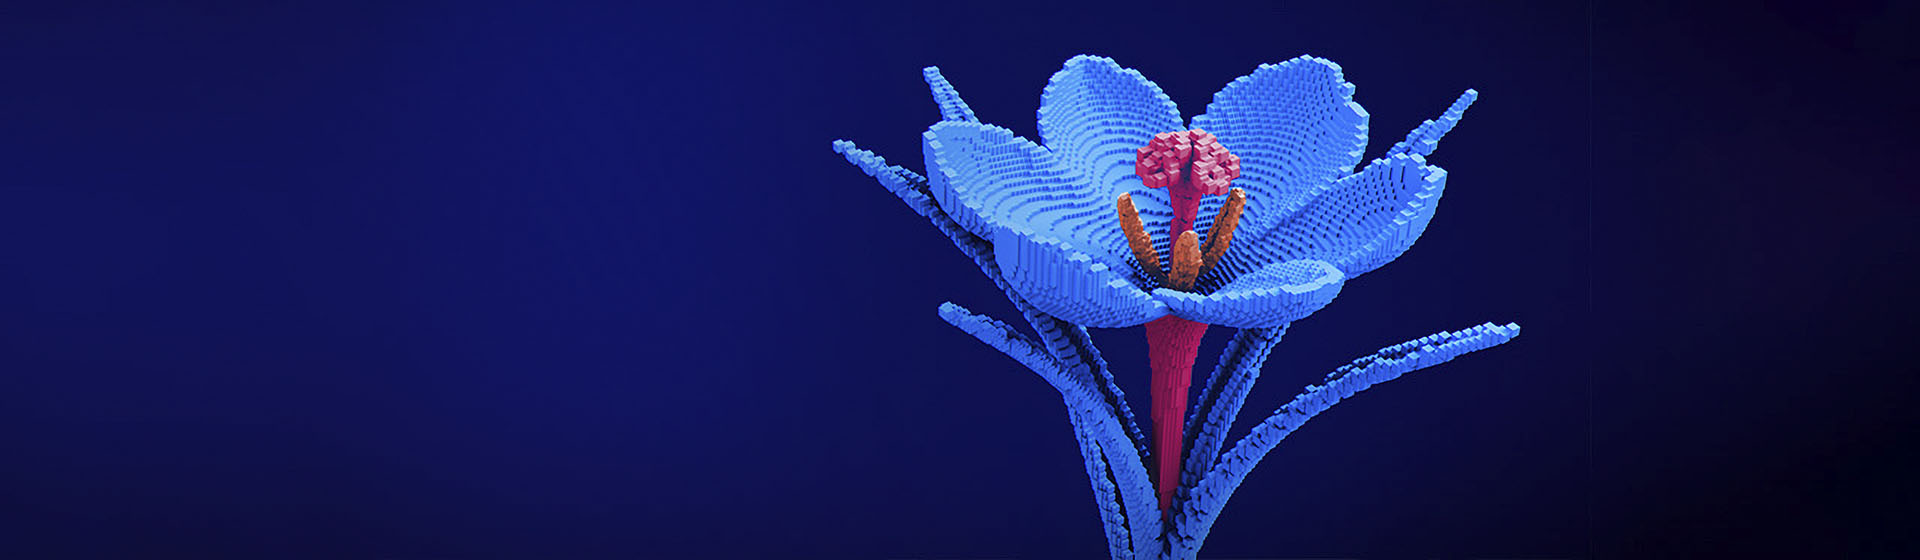 A blue digital flower with a pink stem made up of blocks